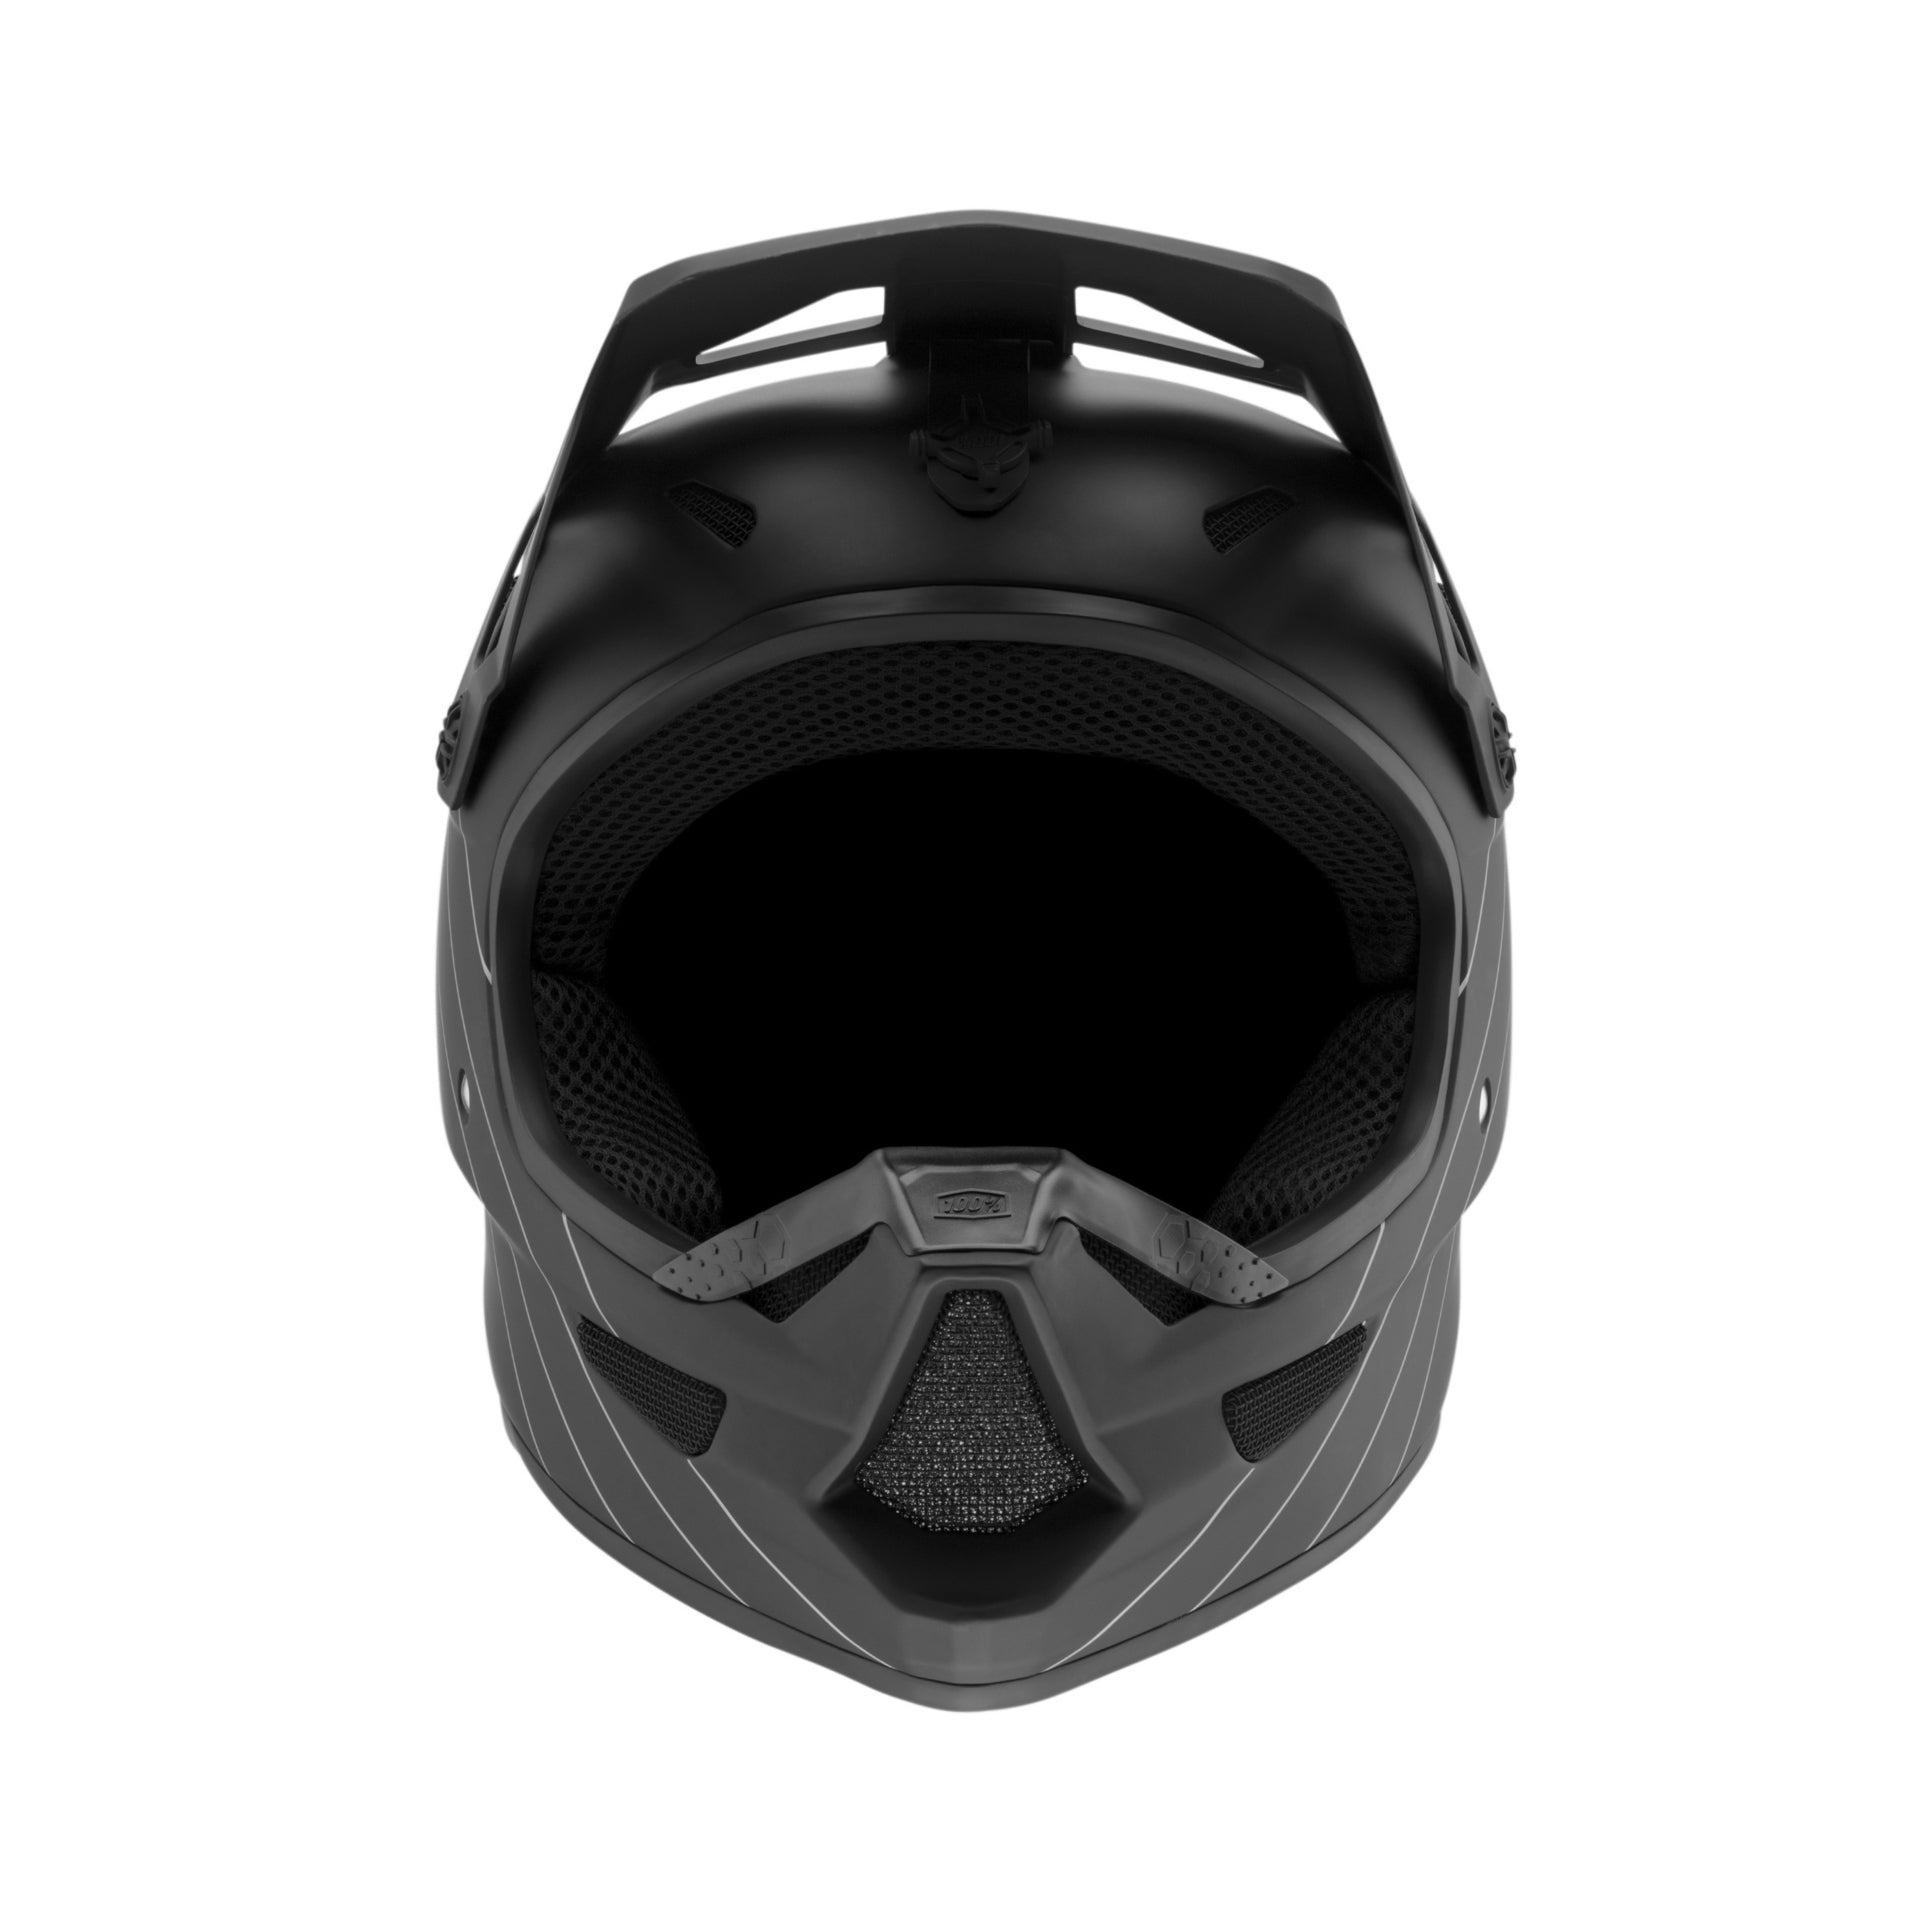 Front view of a black 100% Status Essential Full Face Helmet with full face protection, featuring a visor and ventilation openings. Available in youth sizes.